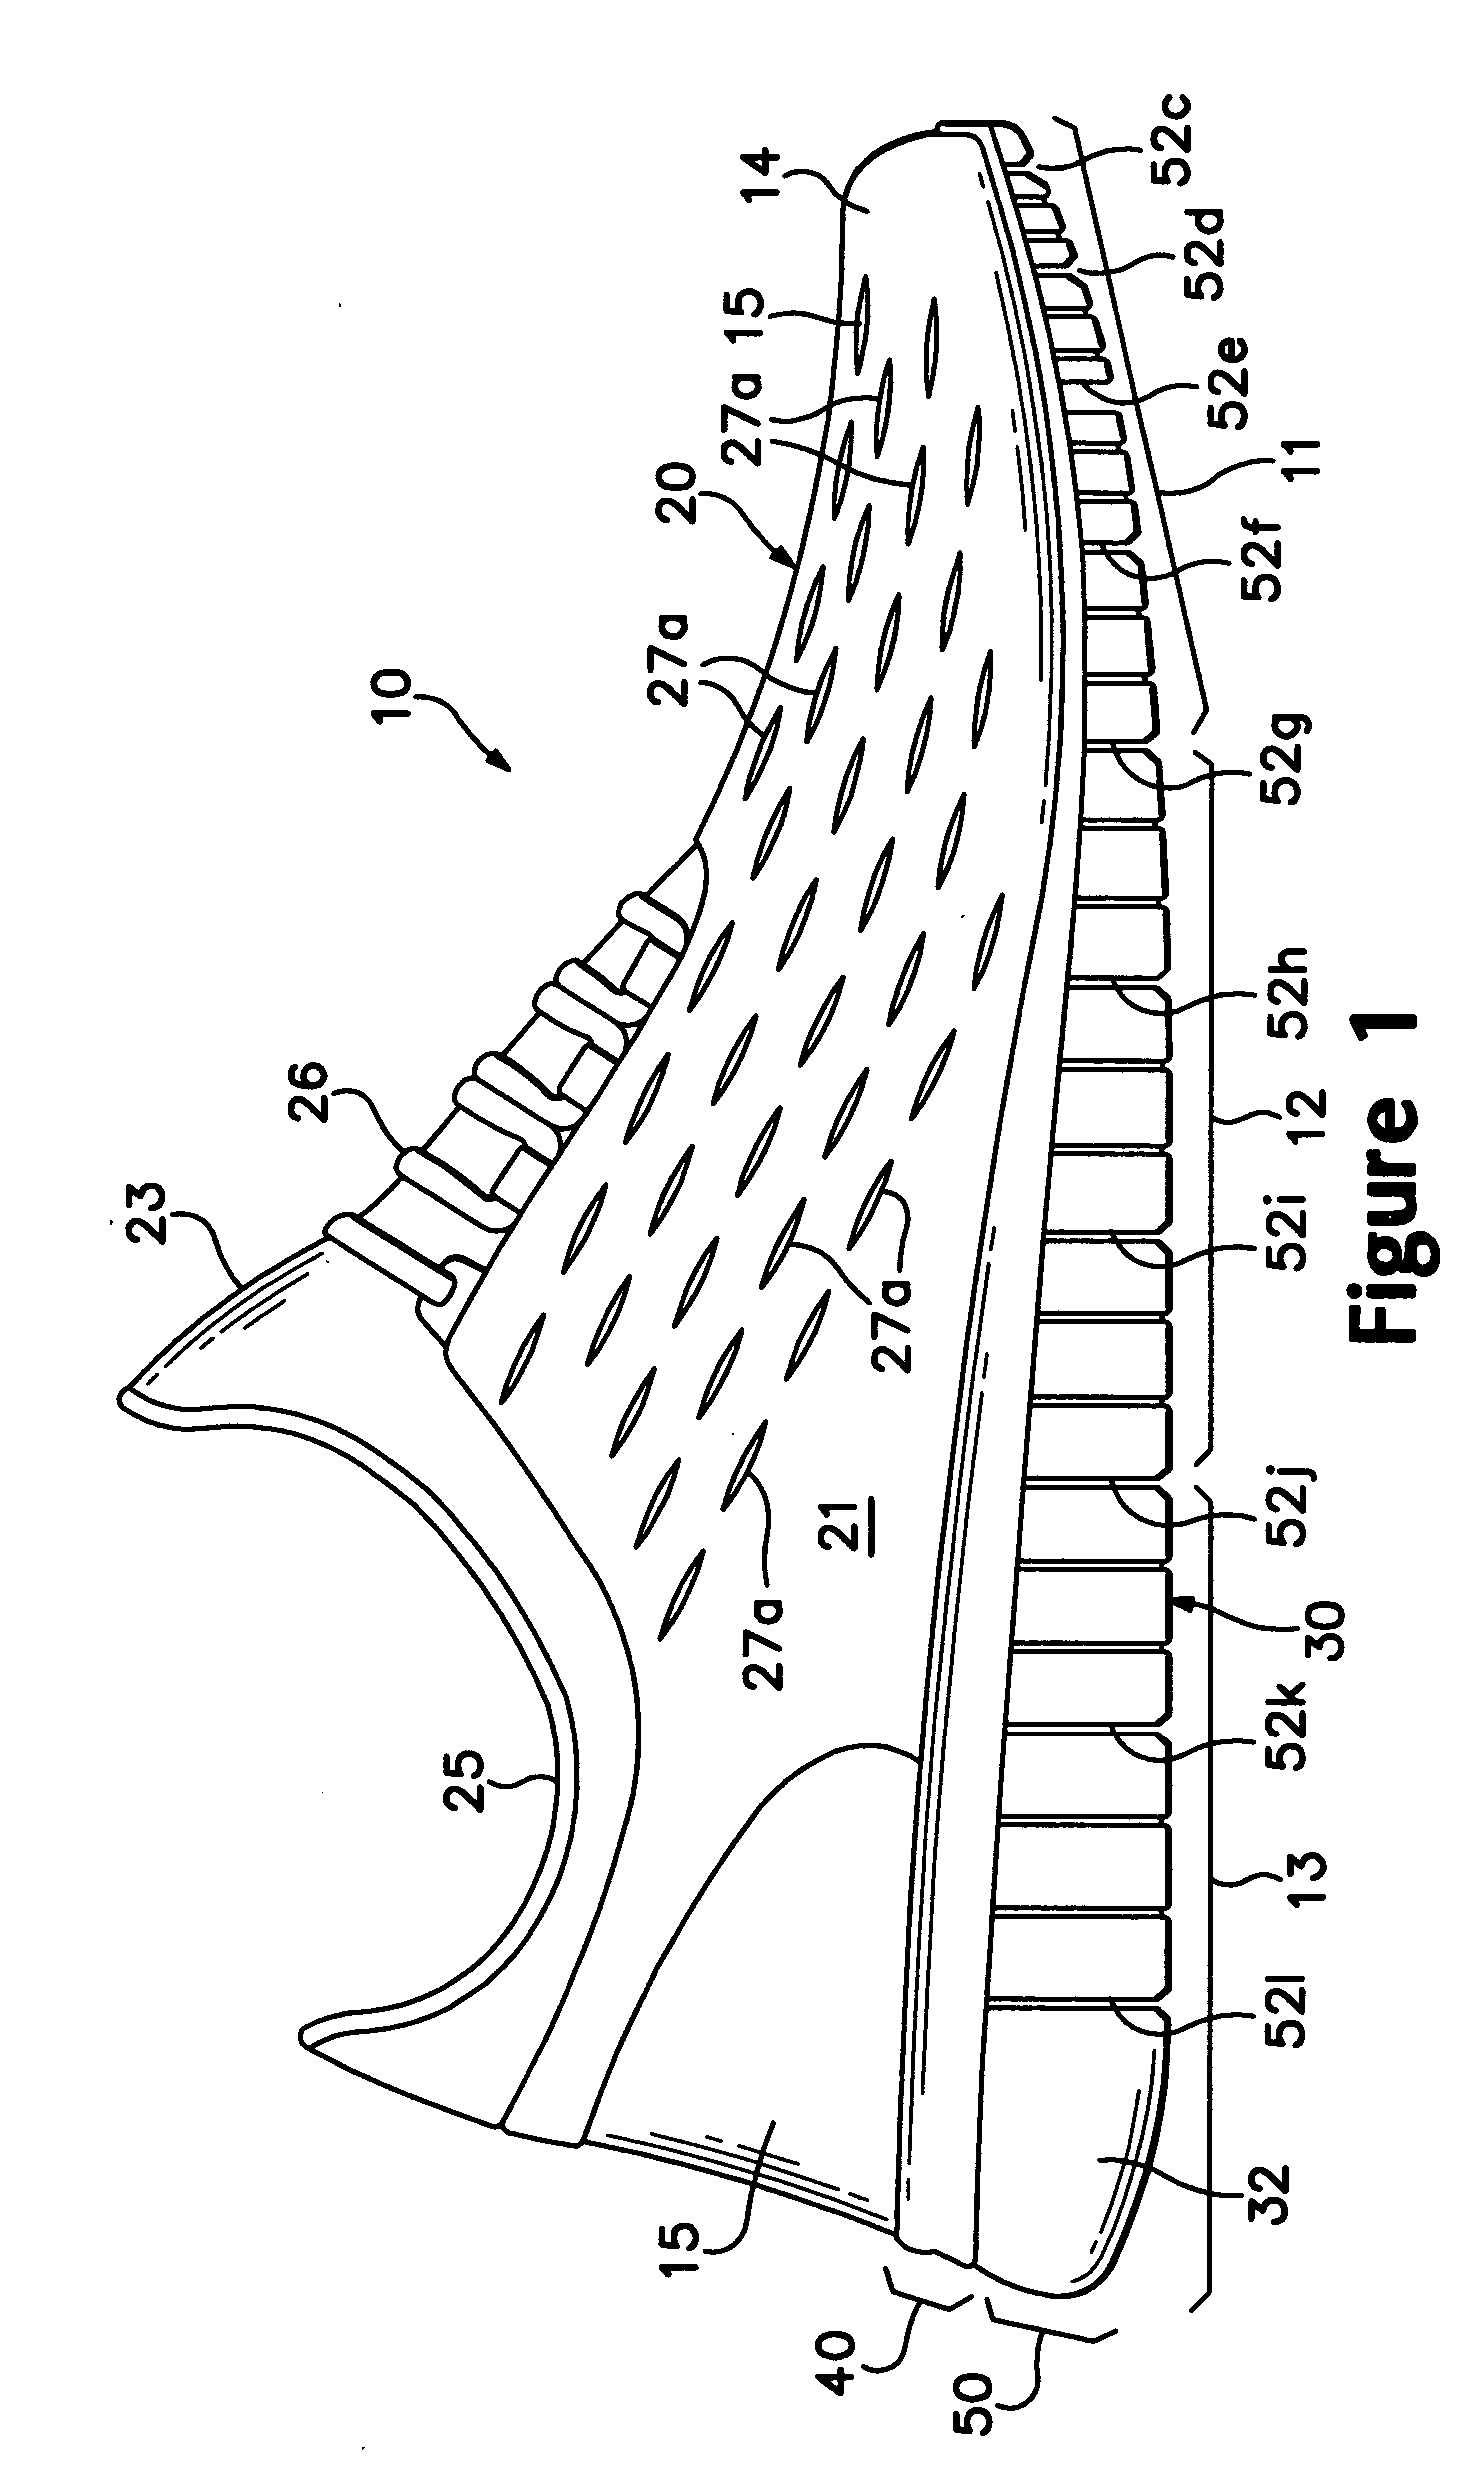 Article of footwear with a stretchable upper and an articulated sole structure